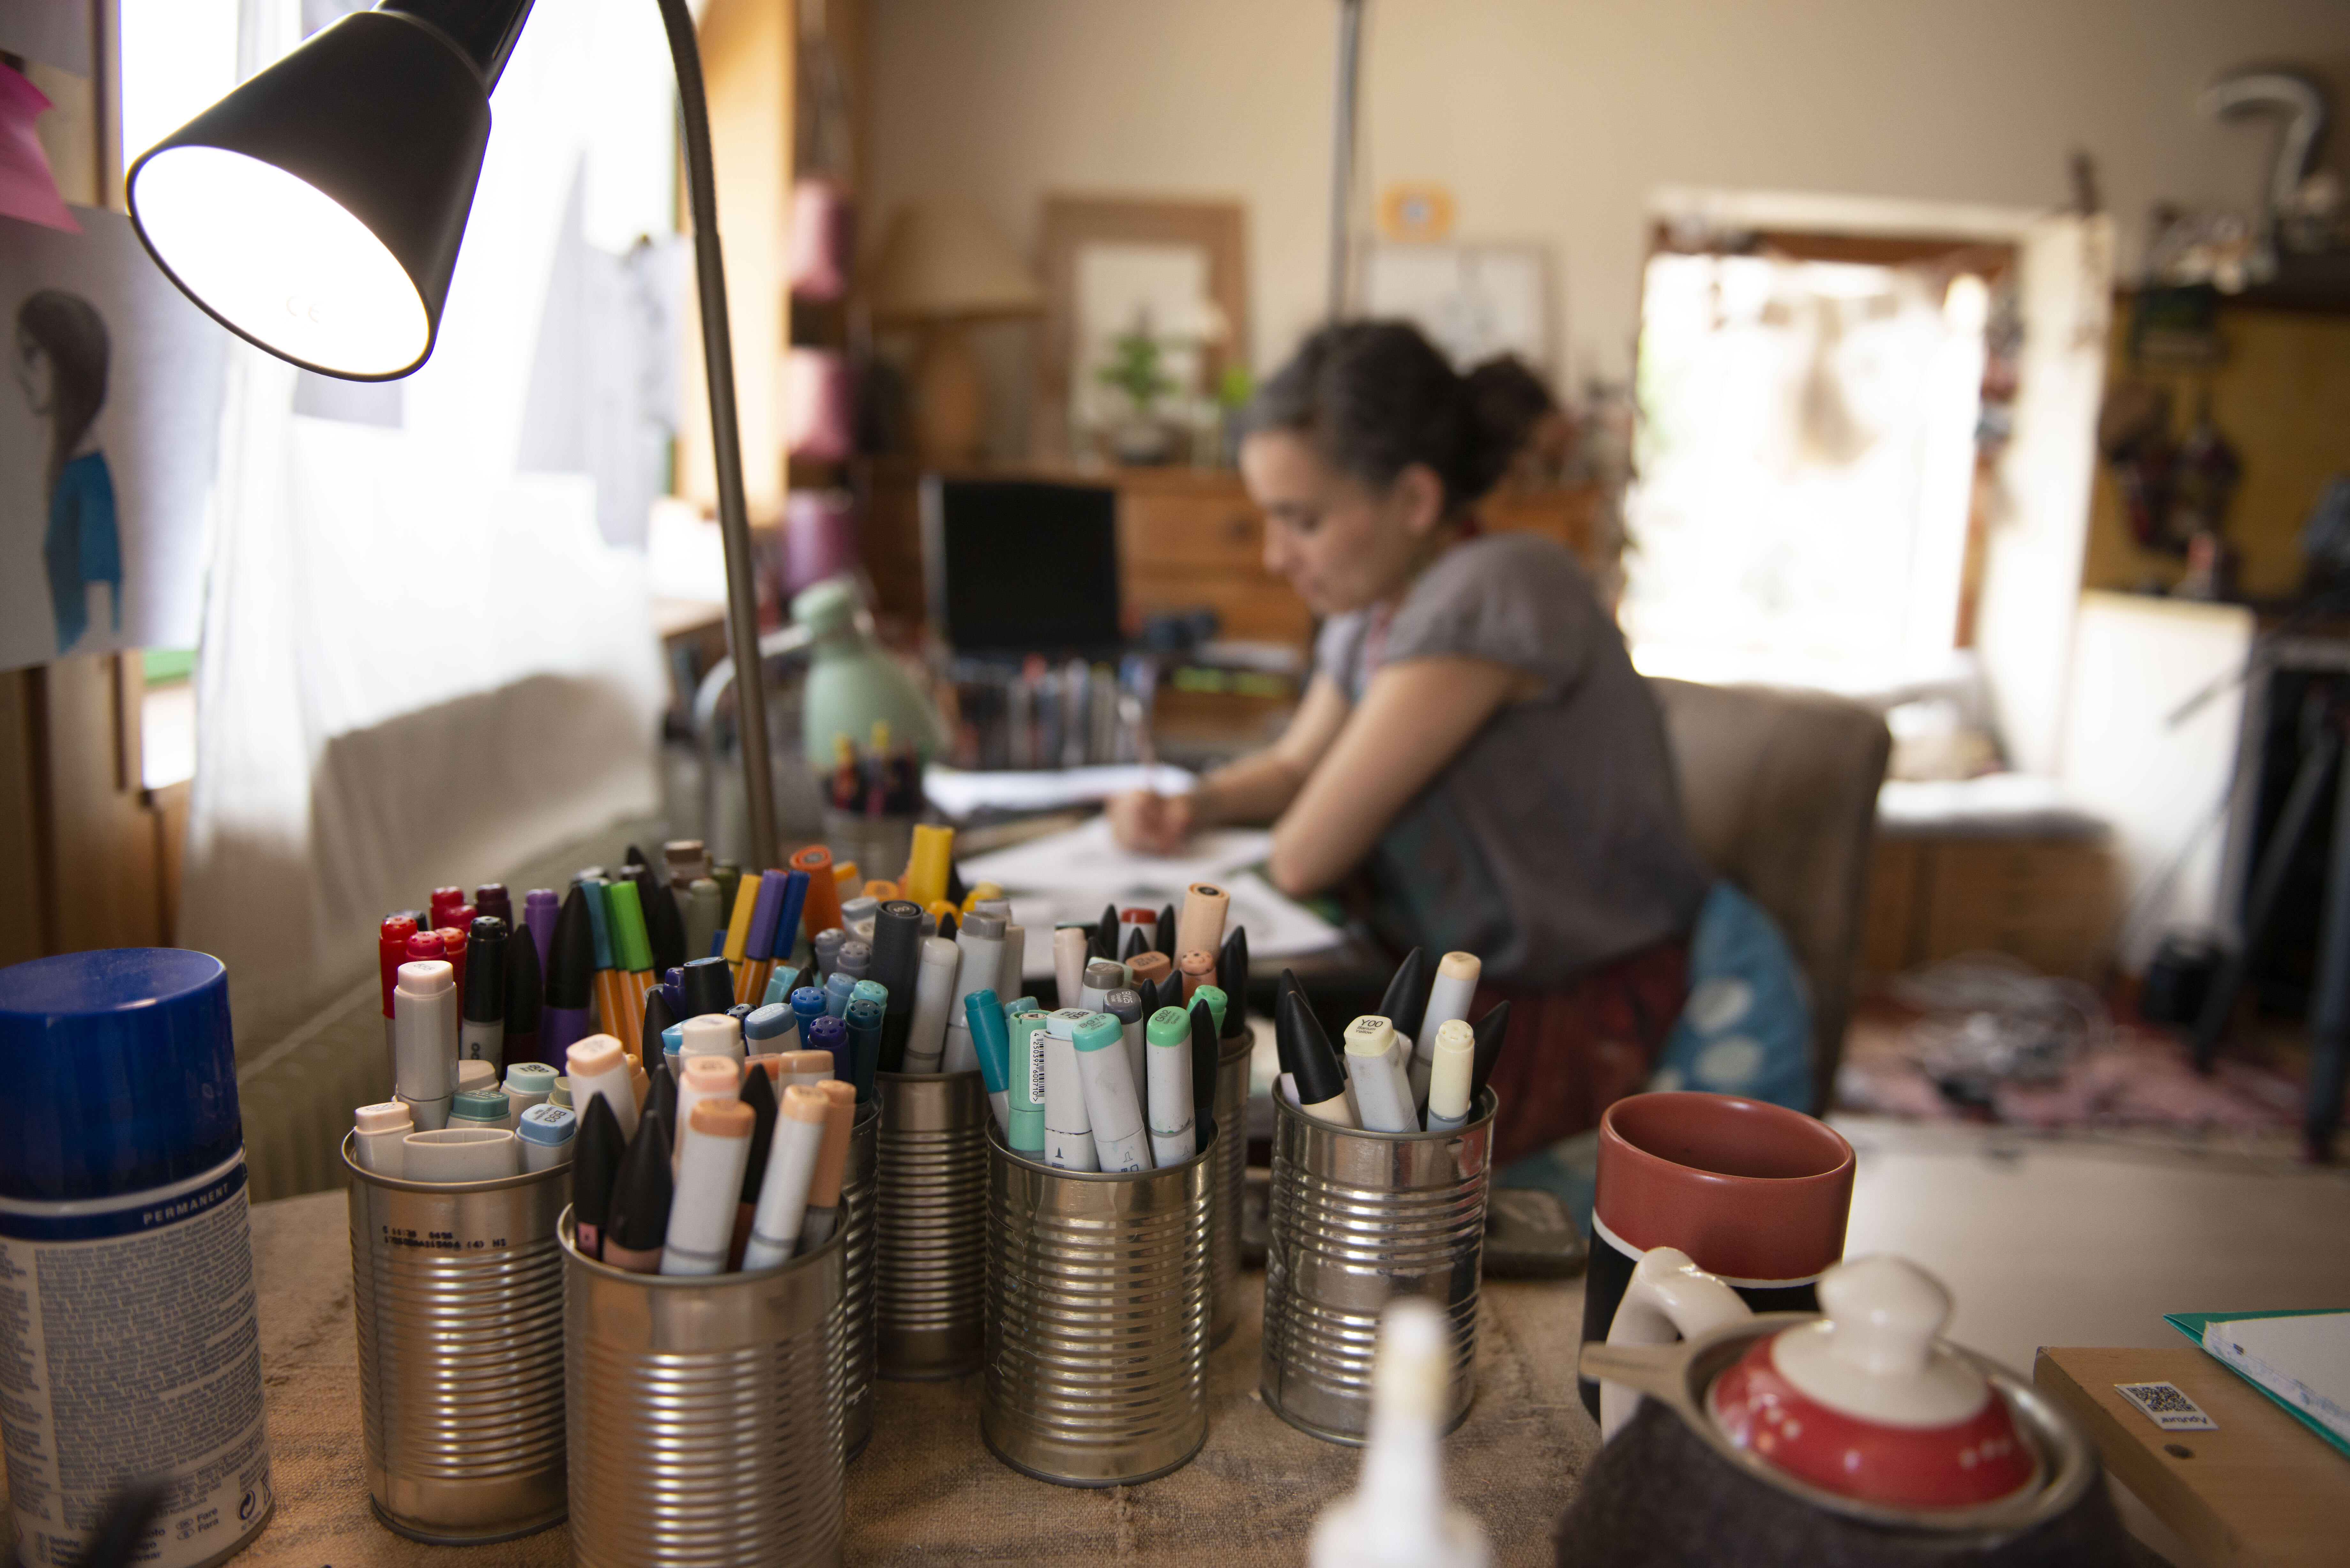 Diala Brisly sits at her drafting table, sketching an illustration for World Refugee Day 2021. Tin cans filled with markers and pens are in the foreground. 